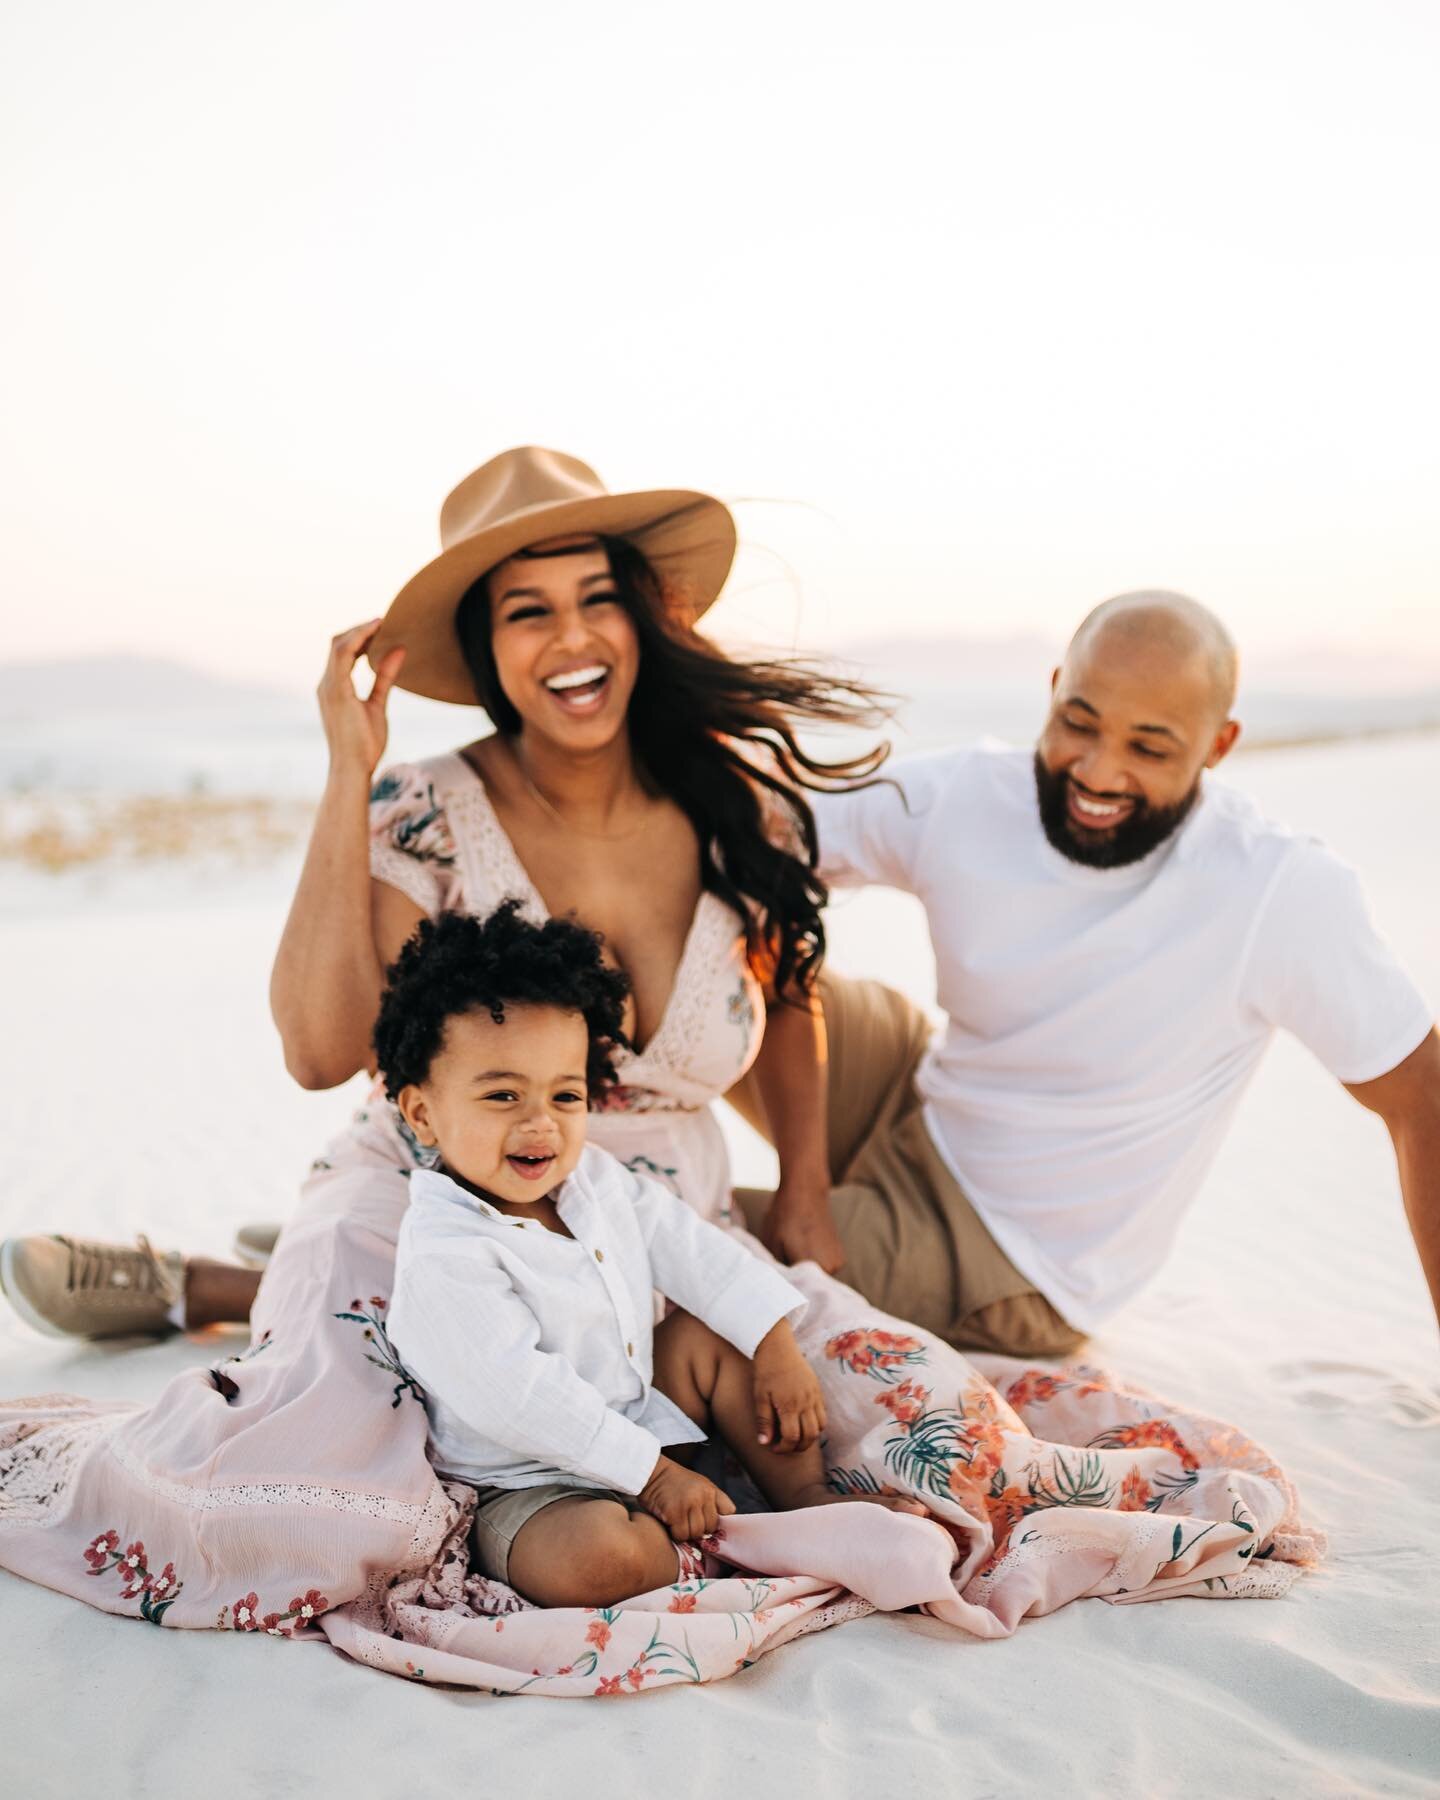 By random chance, we met the sweetest family ever at White Sands National Park last month - all of us out there chasing sunset. Crystal and I couldn&rsquo;t resist snapping some quick family photos for them 💗 do you ever meet total strangers that yo